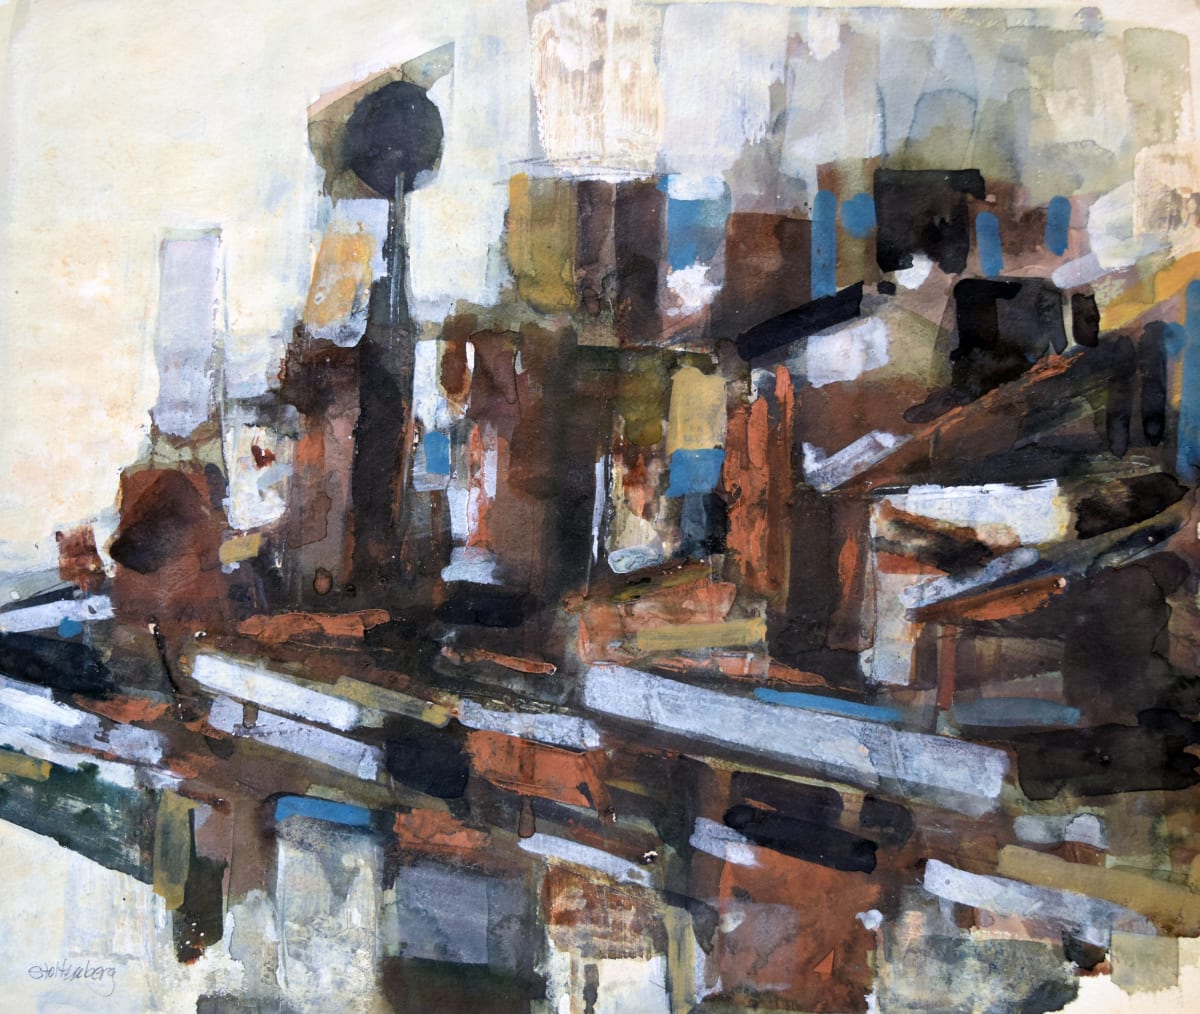 Roof Still Life, Beacon Hill by Donald Stoltenberg  Image: Roof Still Life, Beacon Hill